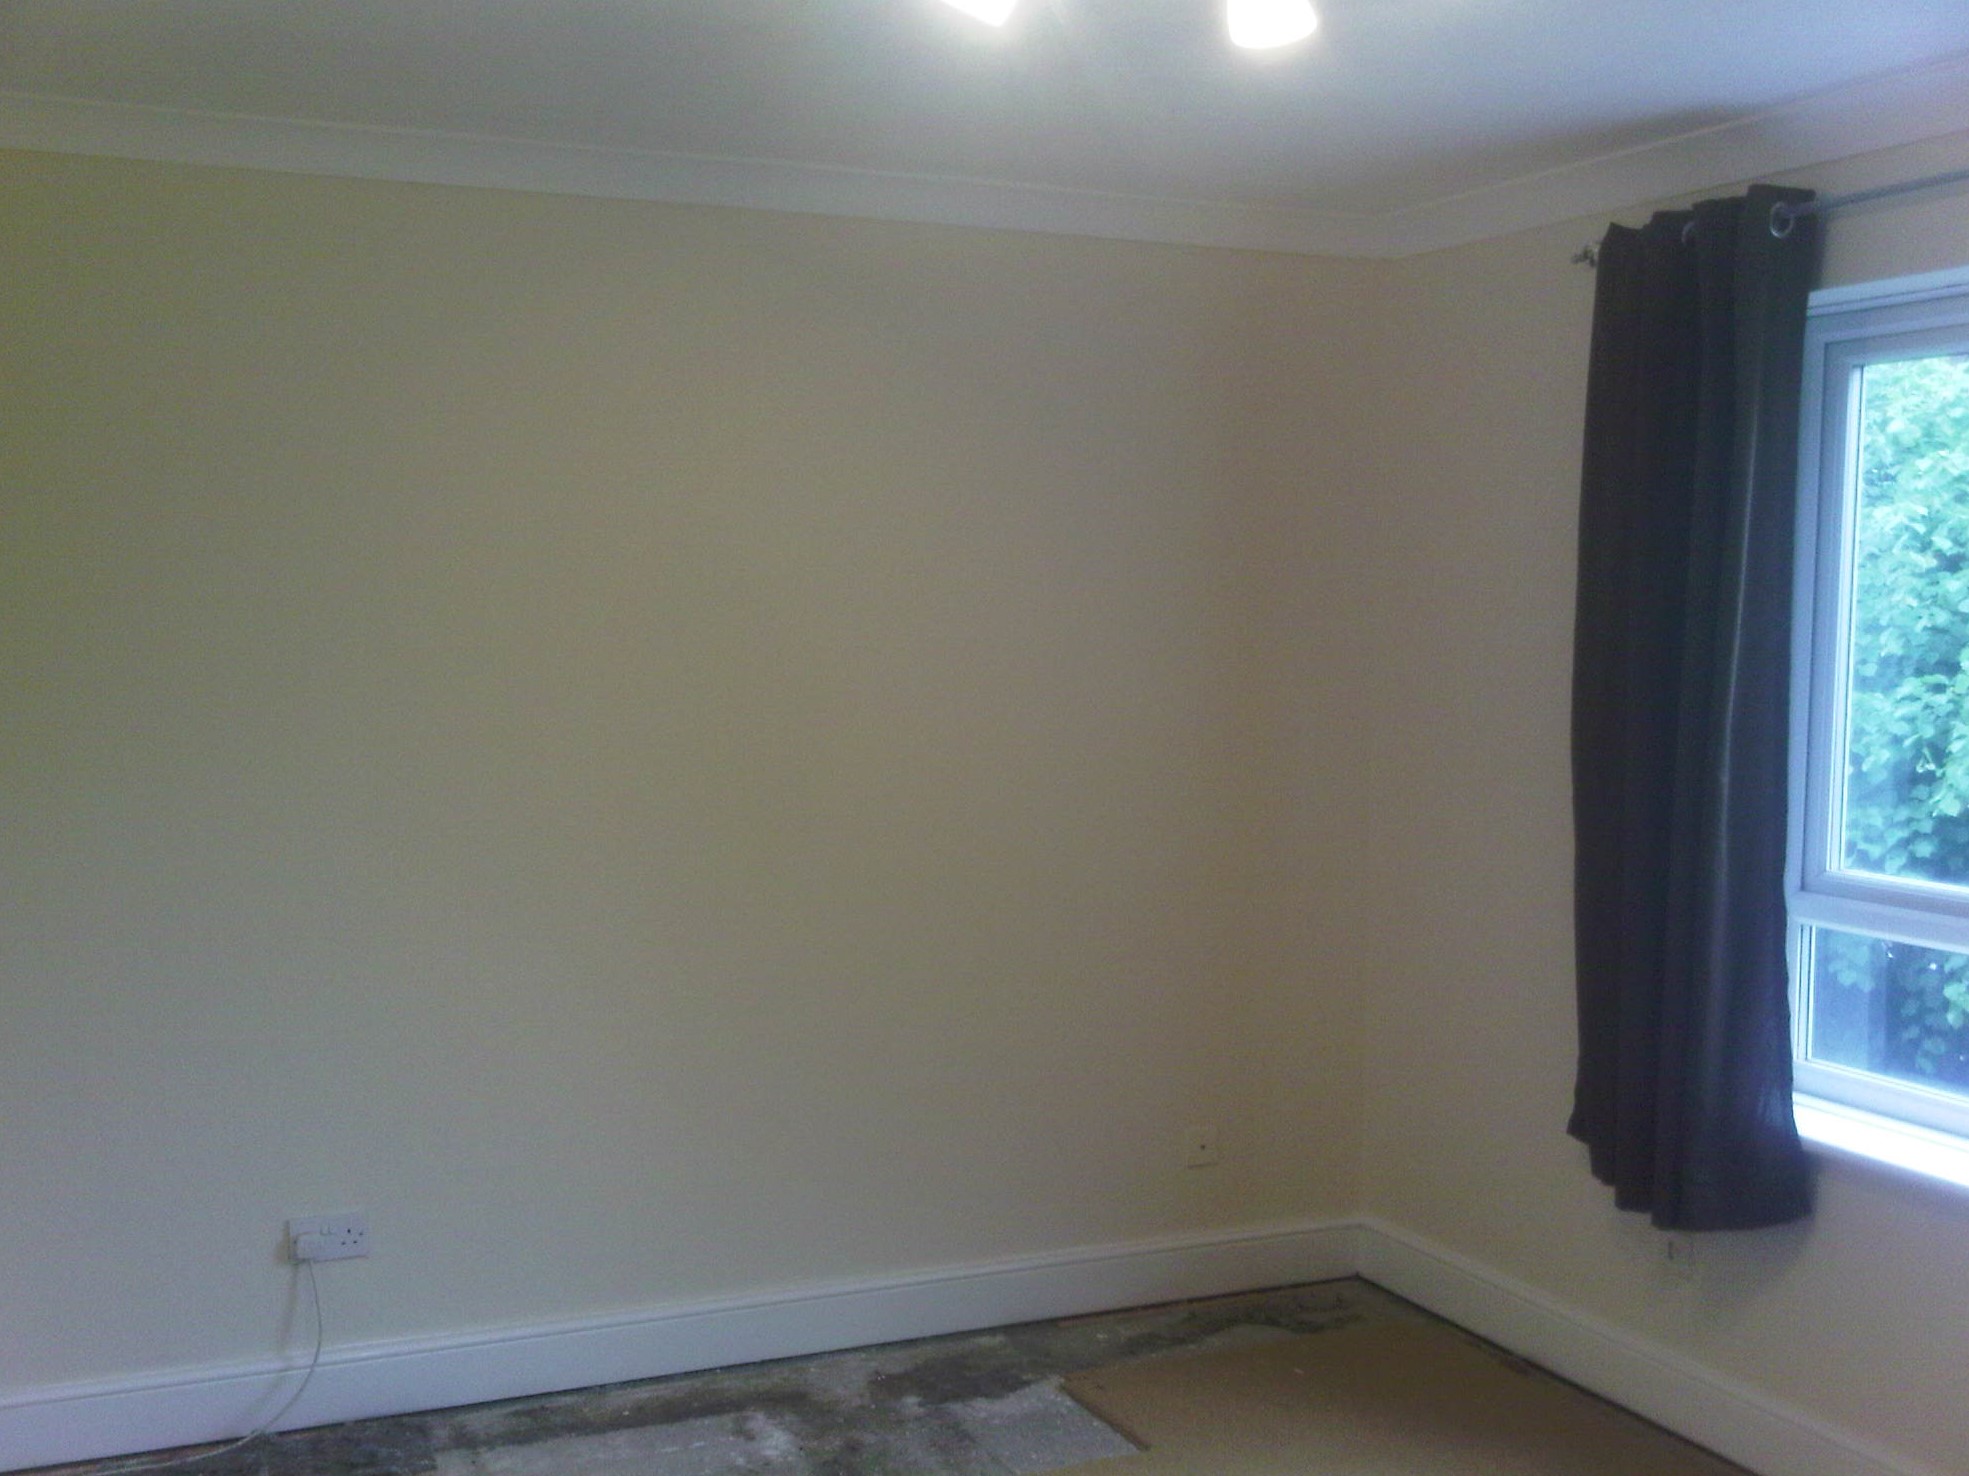 Interior paiting in the Loughton, Debden Chigwell and surrounding areas, by Loughton Handyman